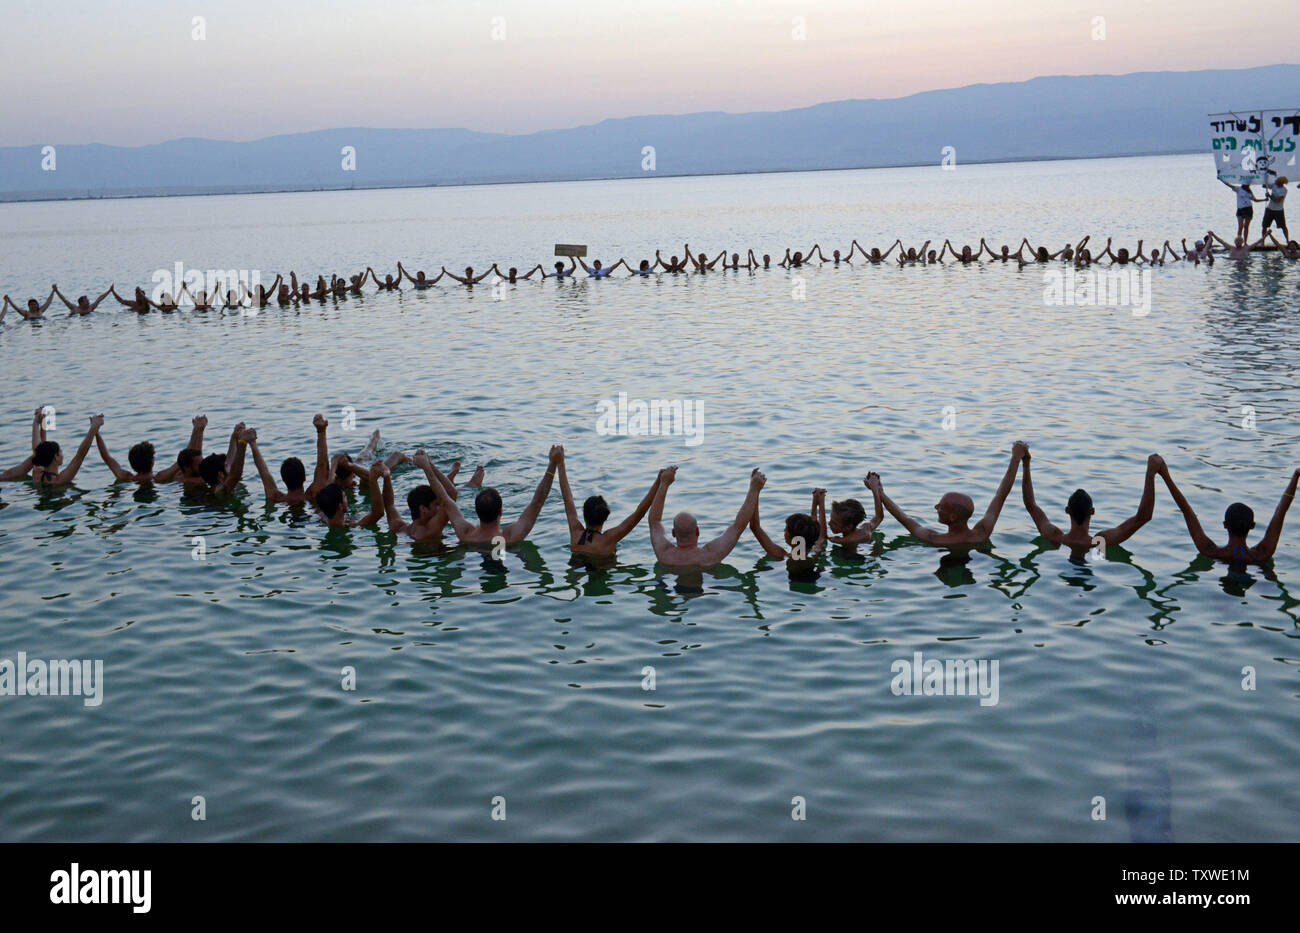 Israeli and international environmental and social activists hold hands in the Dead Sea, during a protest float at dawn against the deterioration of the Dead Sea, in an event organized by U.S. photographer Spencer Tunick, not seen, at Ein Bokek, Israel, September 14, 2012. UPI/Debbie Hill Stock Photo